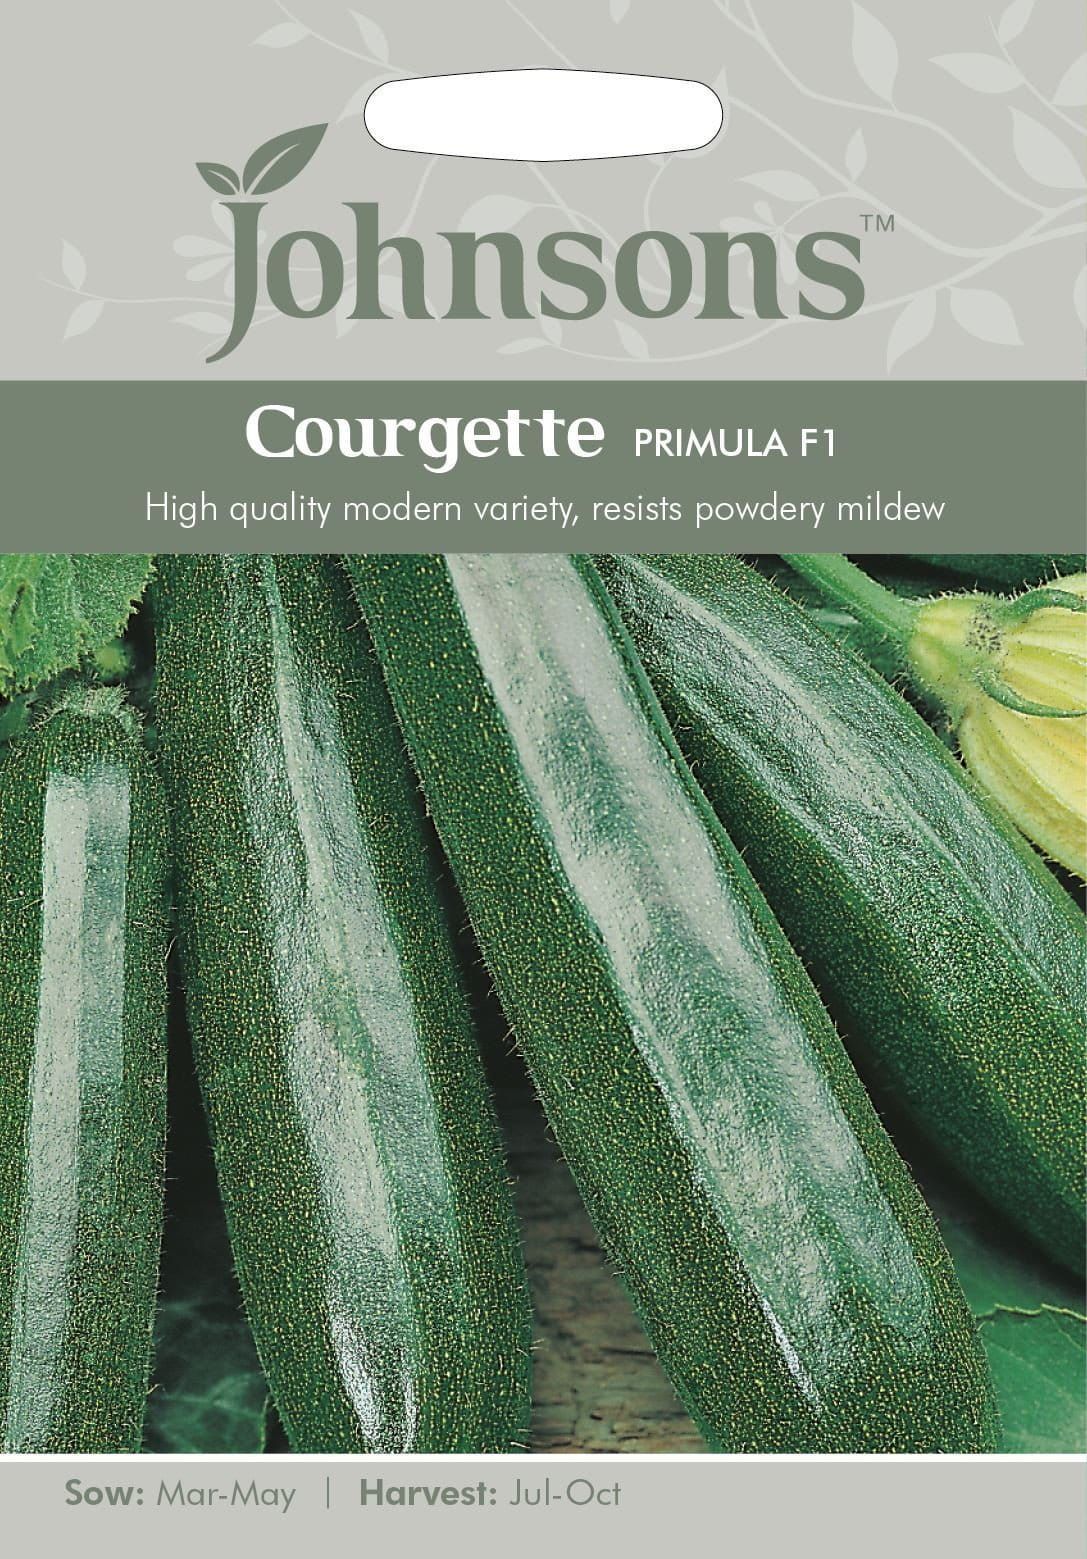 Johnsons Courgette Primula F1 10 Seeds